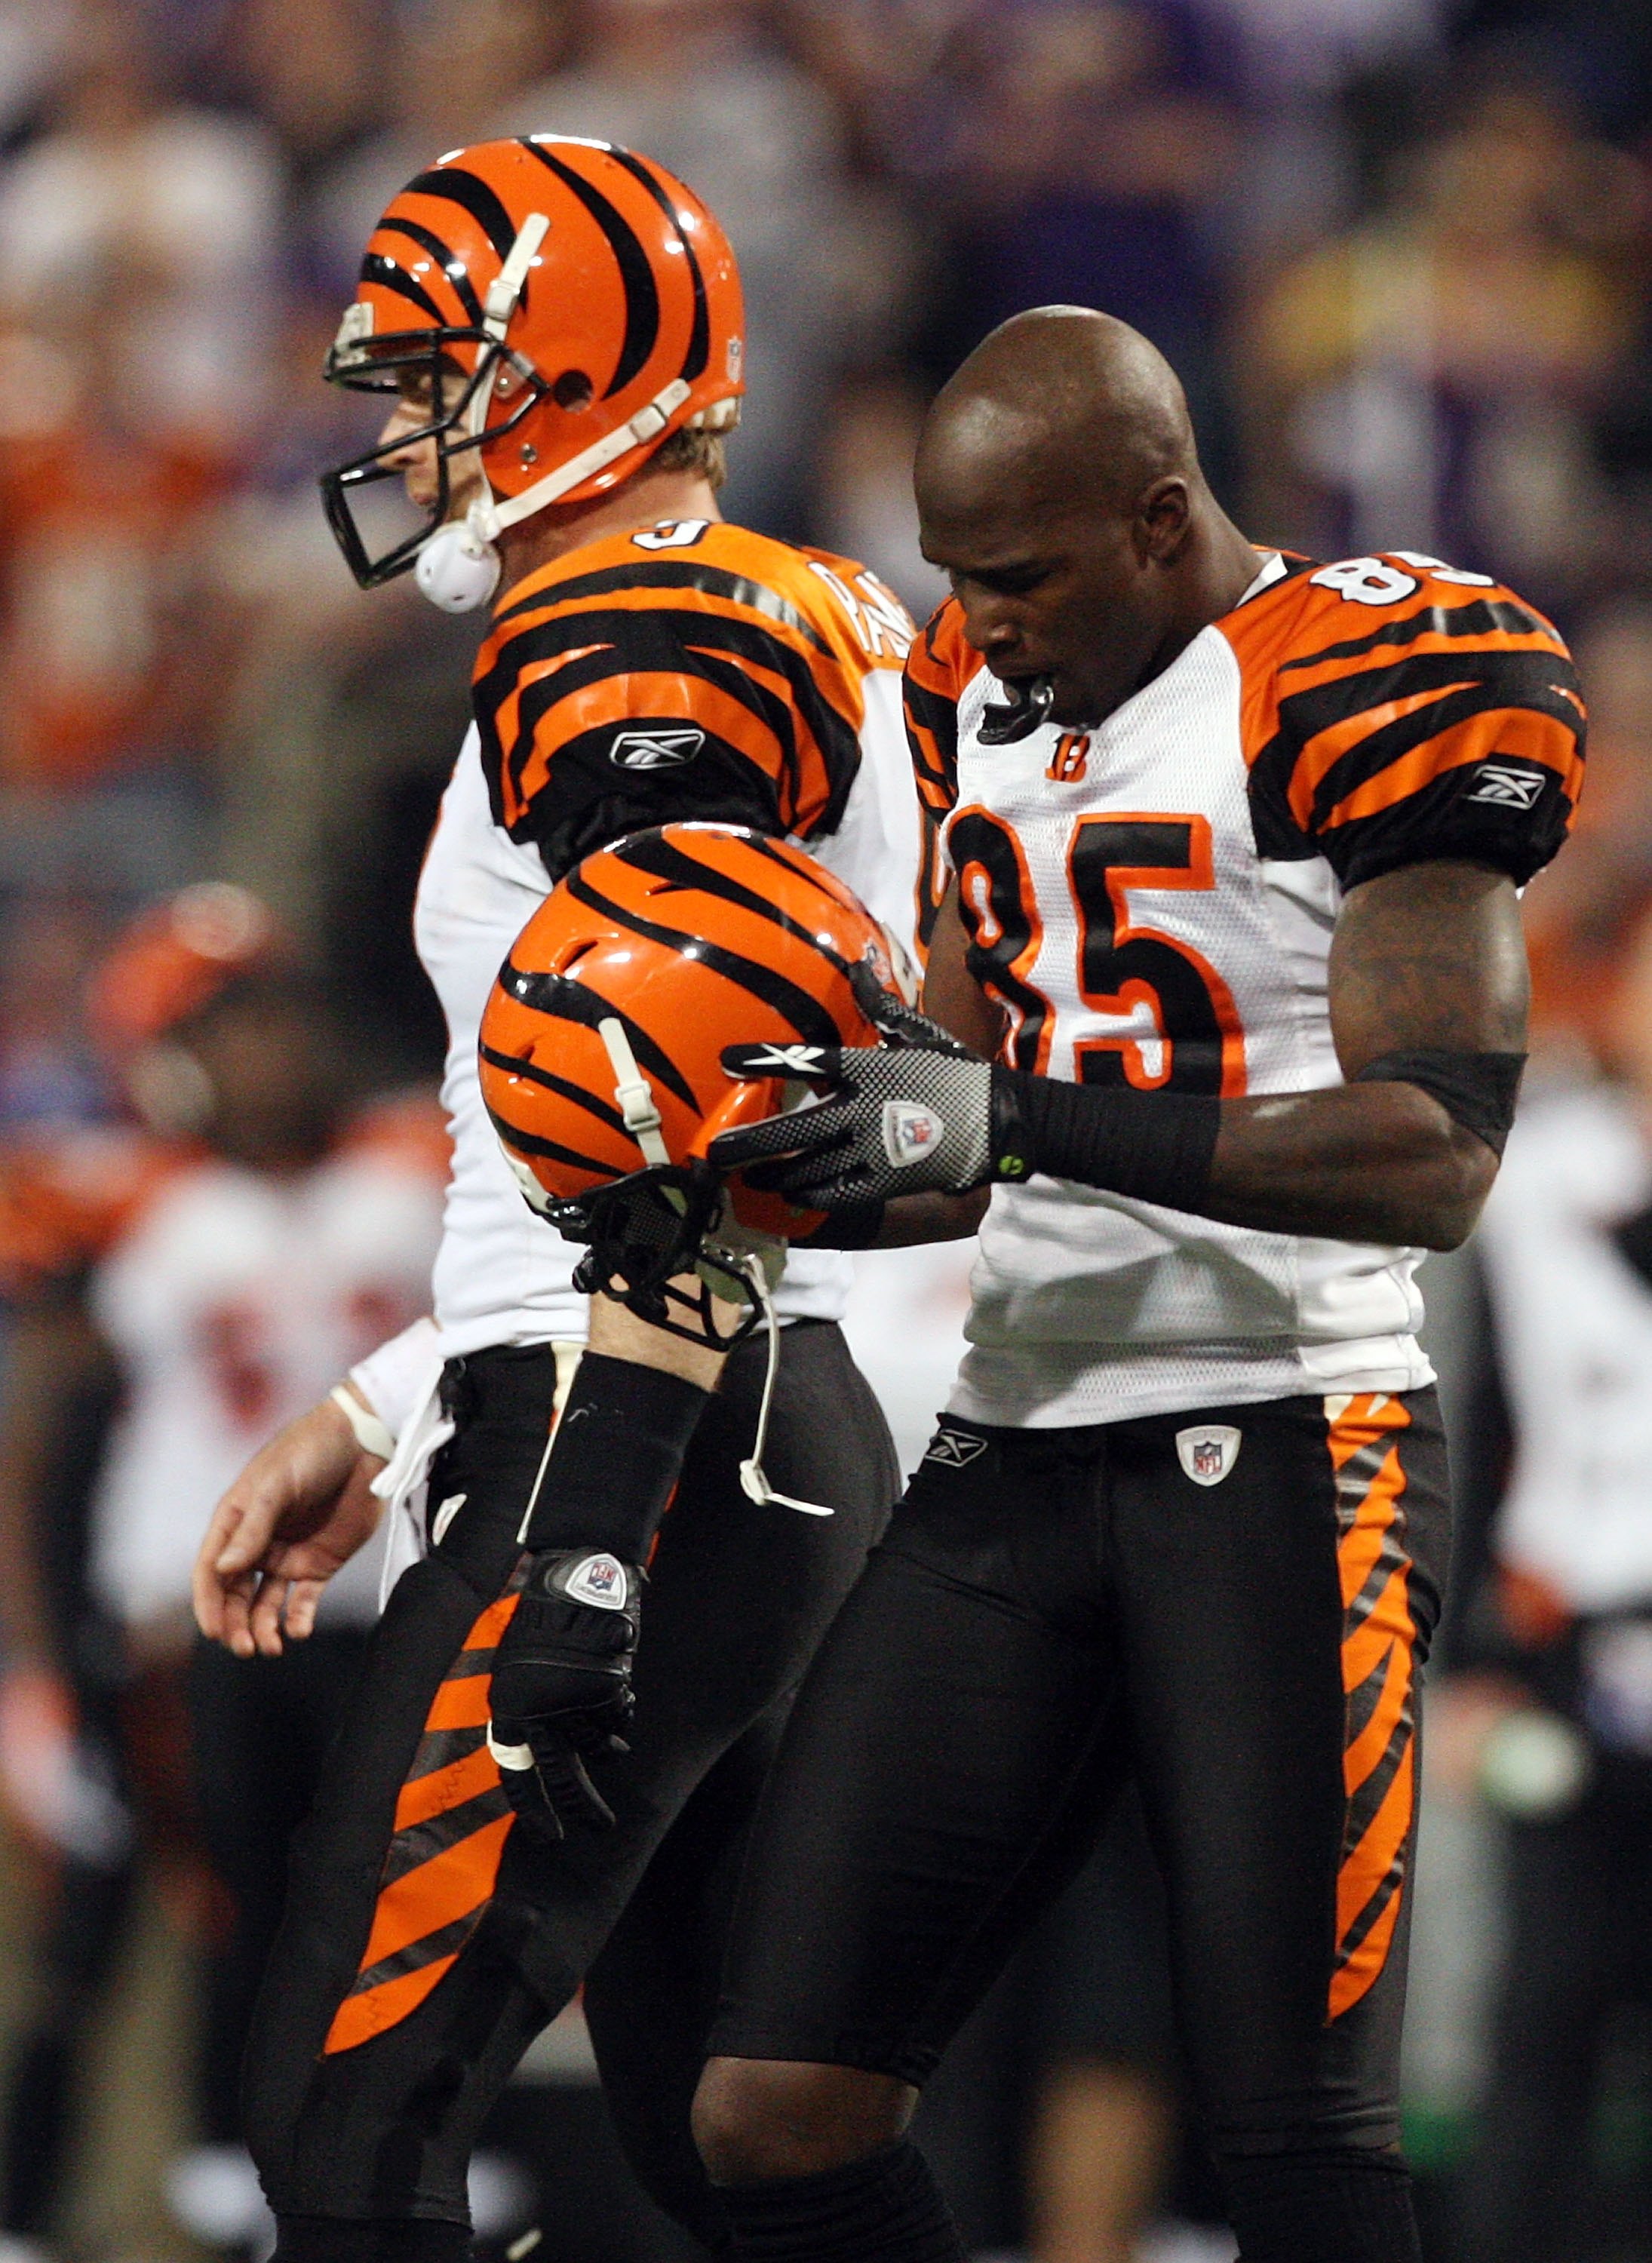 MINNEAPOLIS, MN - DECEMBER 13:  Chad Ochocinco #85 and Carson Palmer #9 of the Cincinnati Bengals look on in the second half against the Minnesota Vikings on December 13, 2009 at Hubert H. Humphrey Metrodome in Minneapolis, Minnesota. The Vikings defeated